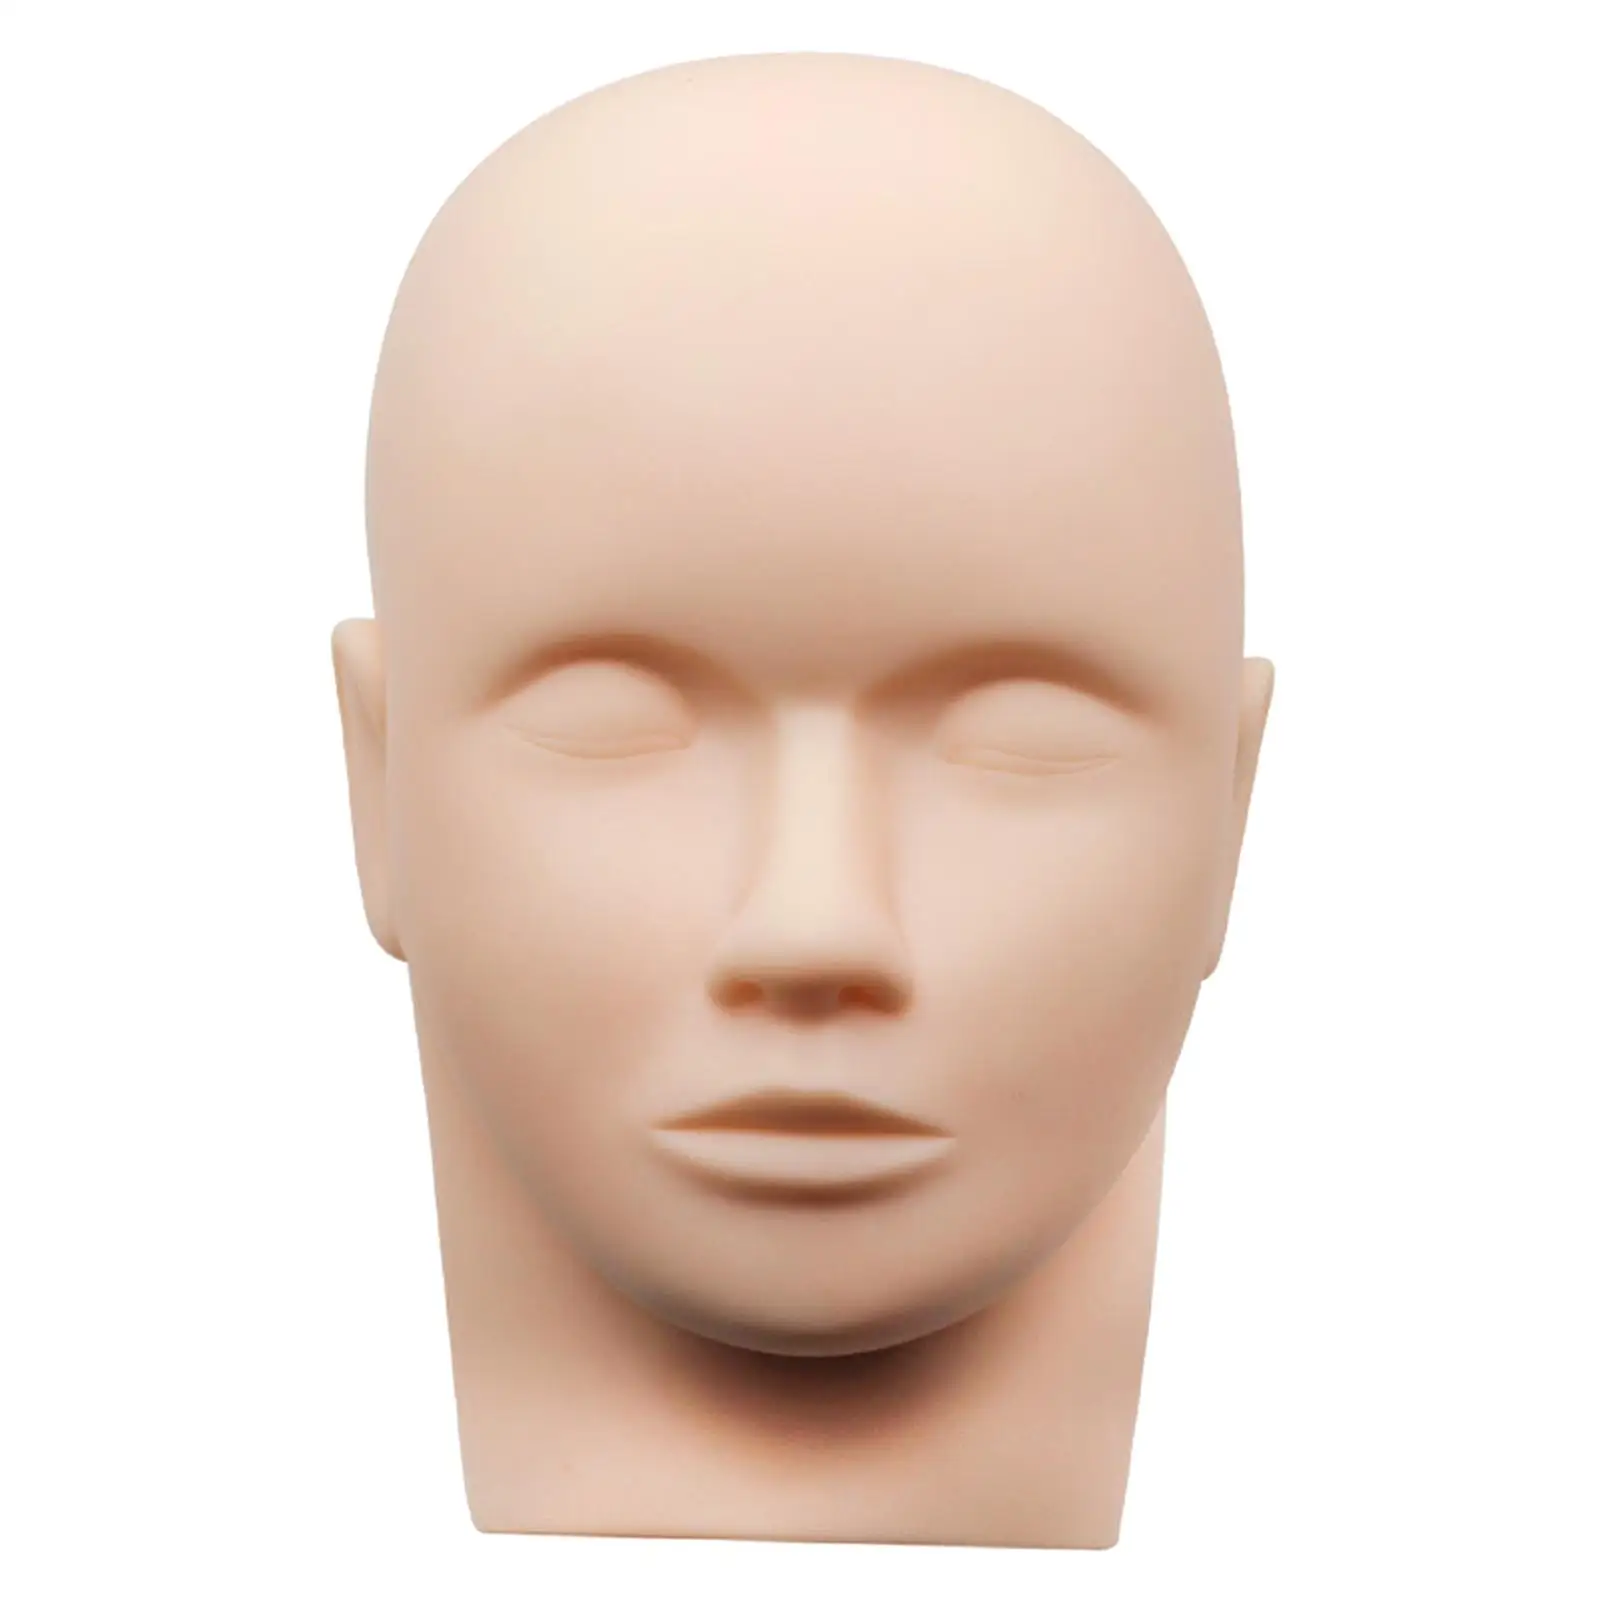 Eyelash Silicone Head Mold Practice Head Lash Extension Supplies Soft Touch Mannequin Training Practice Make up